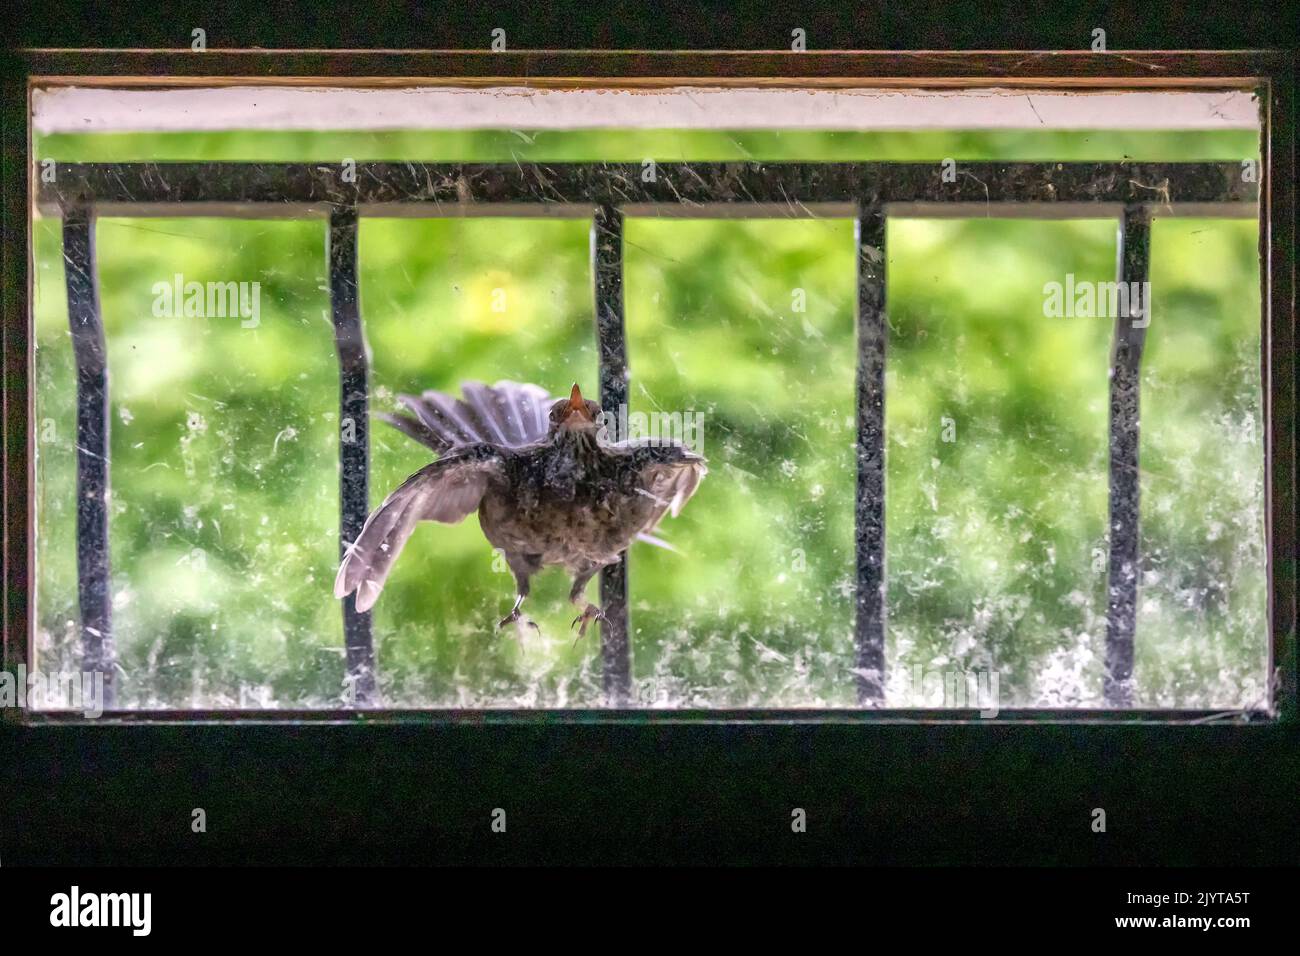 Female Blackbird (Turdus merula) struggling with her image reflected in the basement window of a house, Country garden, Lorraine, France Stock Photo